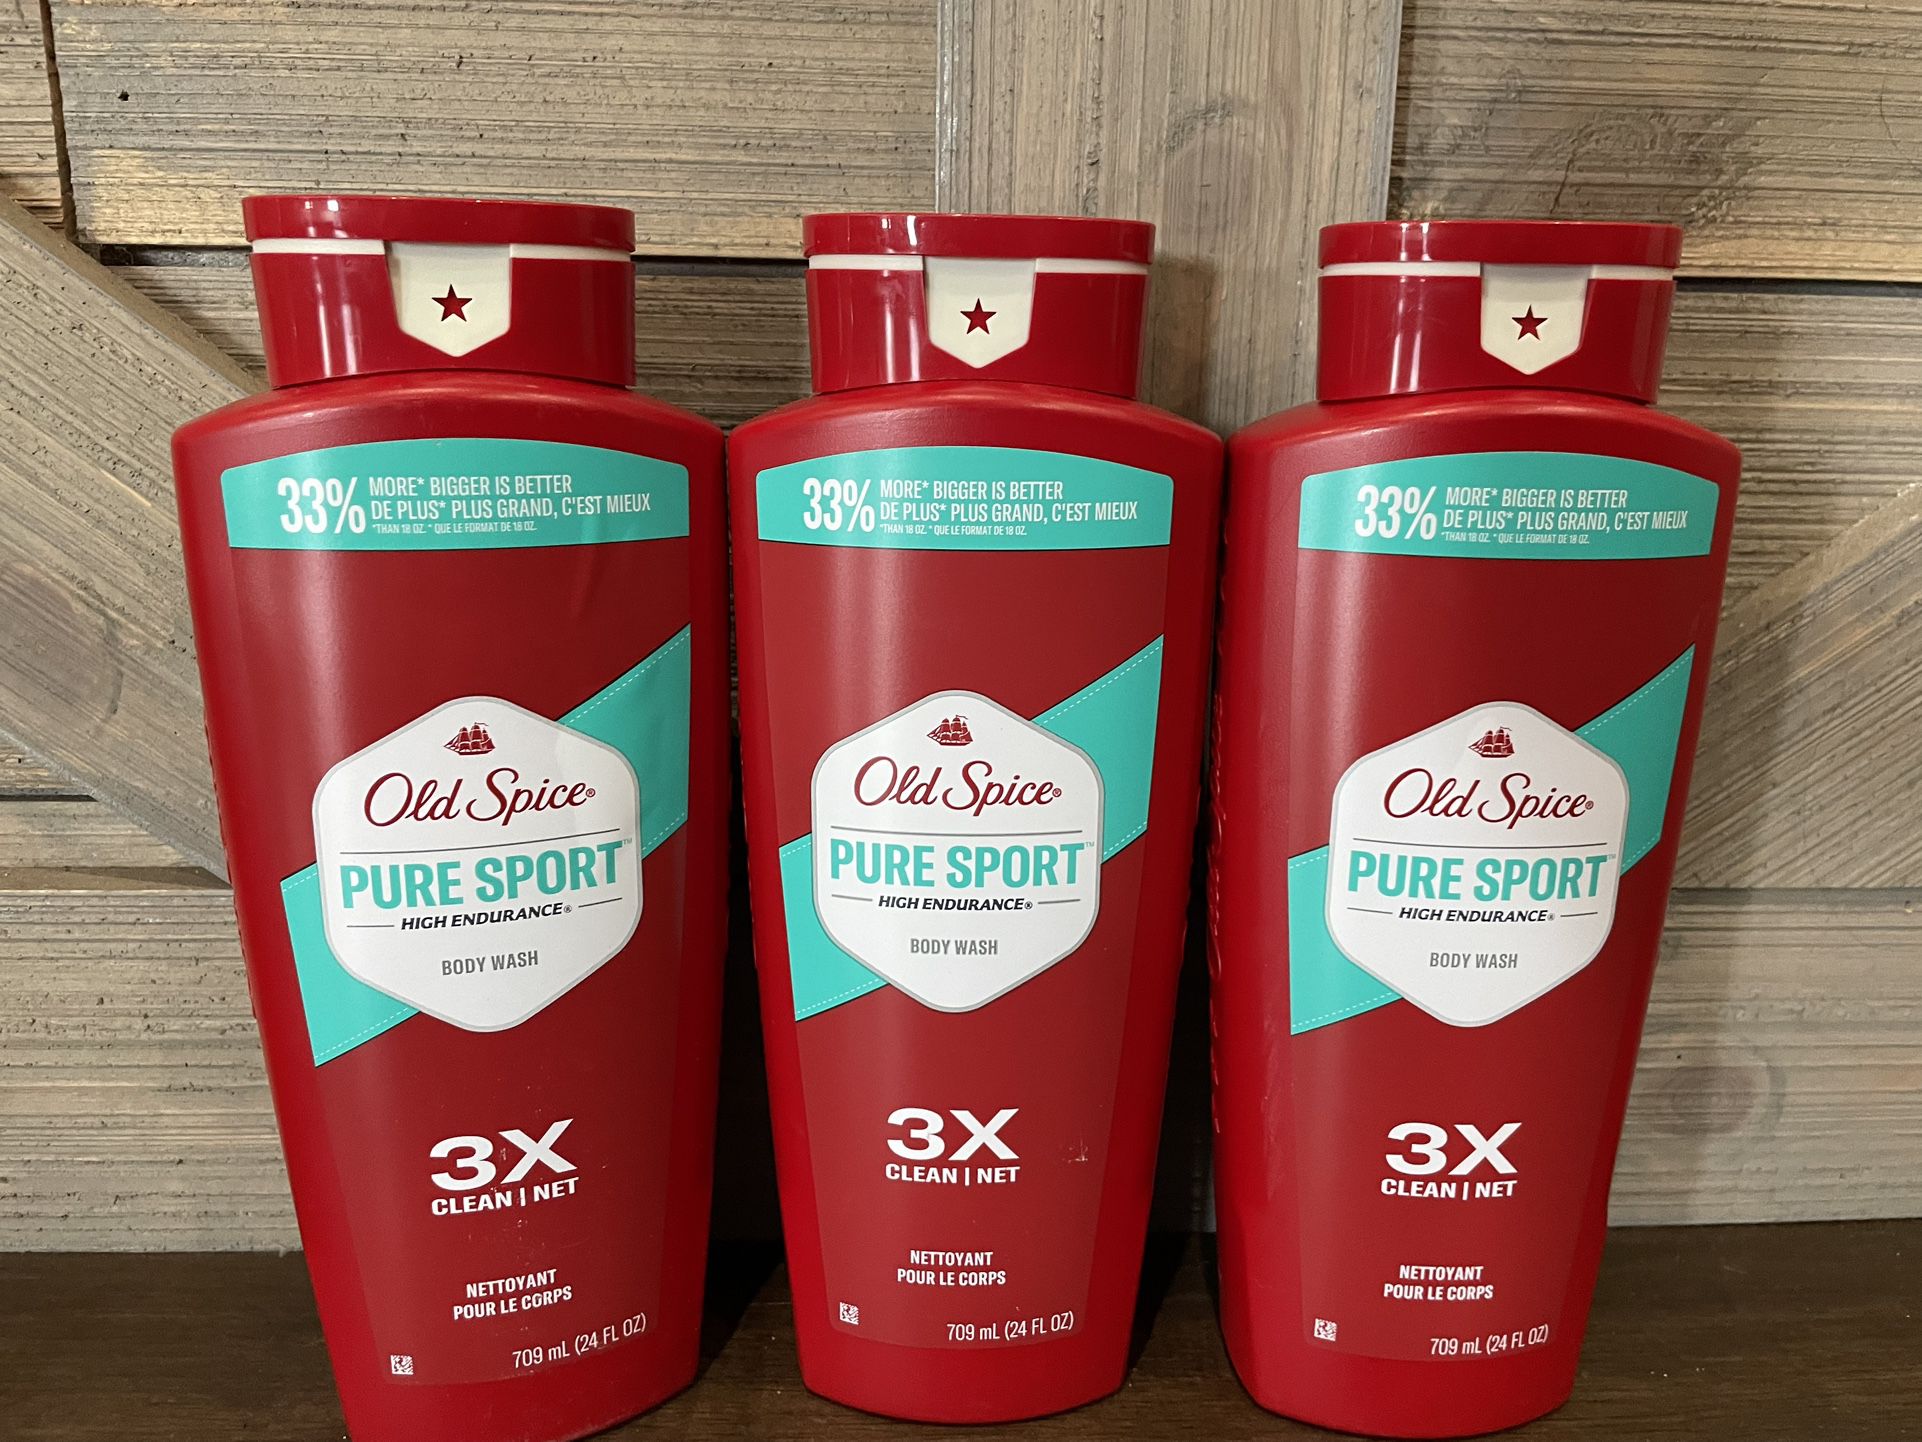 Old spice Body Wash